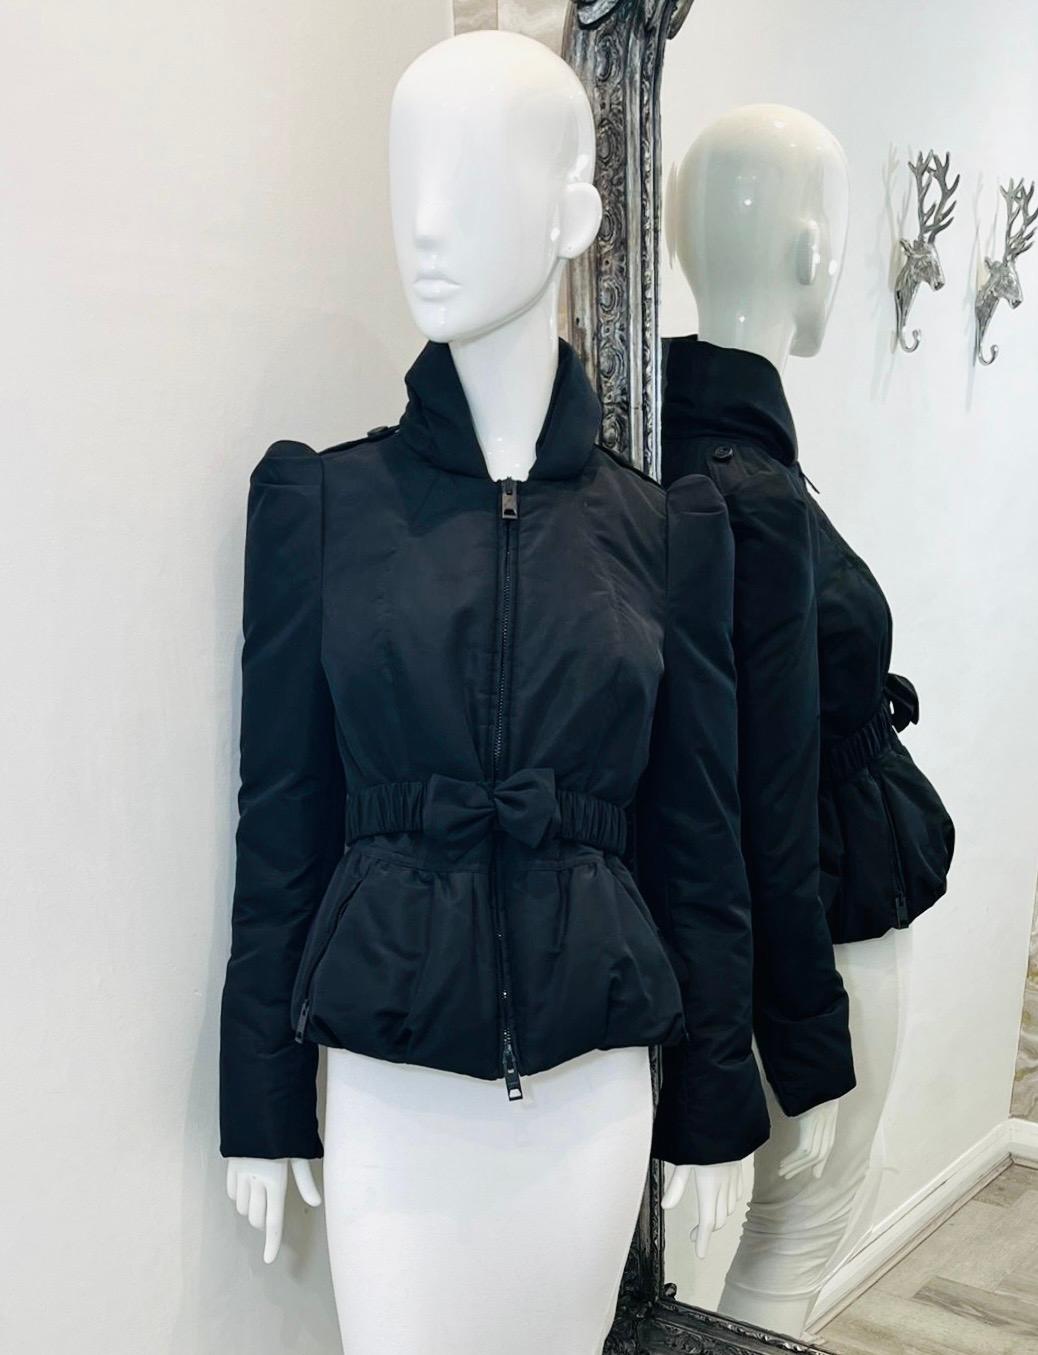 Burberry Prorsum Goose Down Bow Detailed Silk Jacket

Black jacket designed with bow detailed belted waist.

Styled with puffed shoulders, standing collar and zip fastening through centre.

Featuring side, zipped pockets, buttoned shoulder